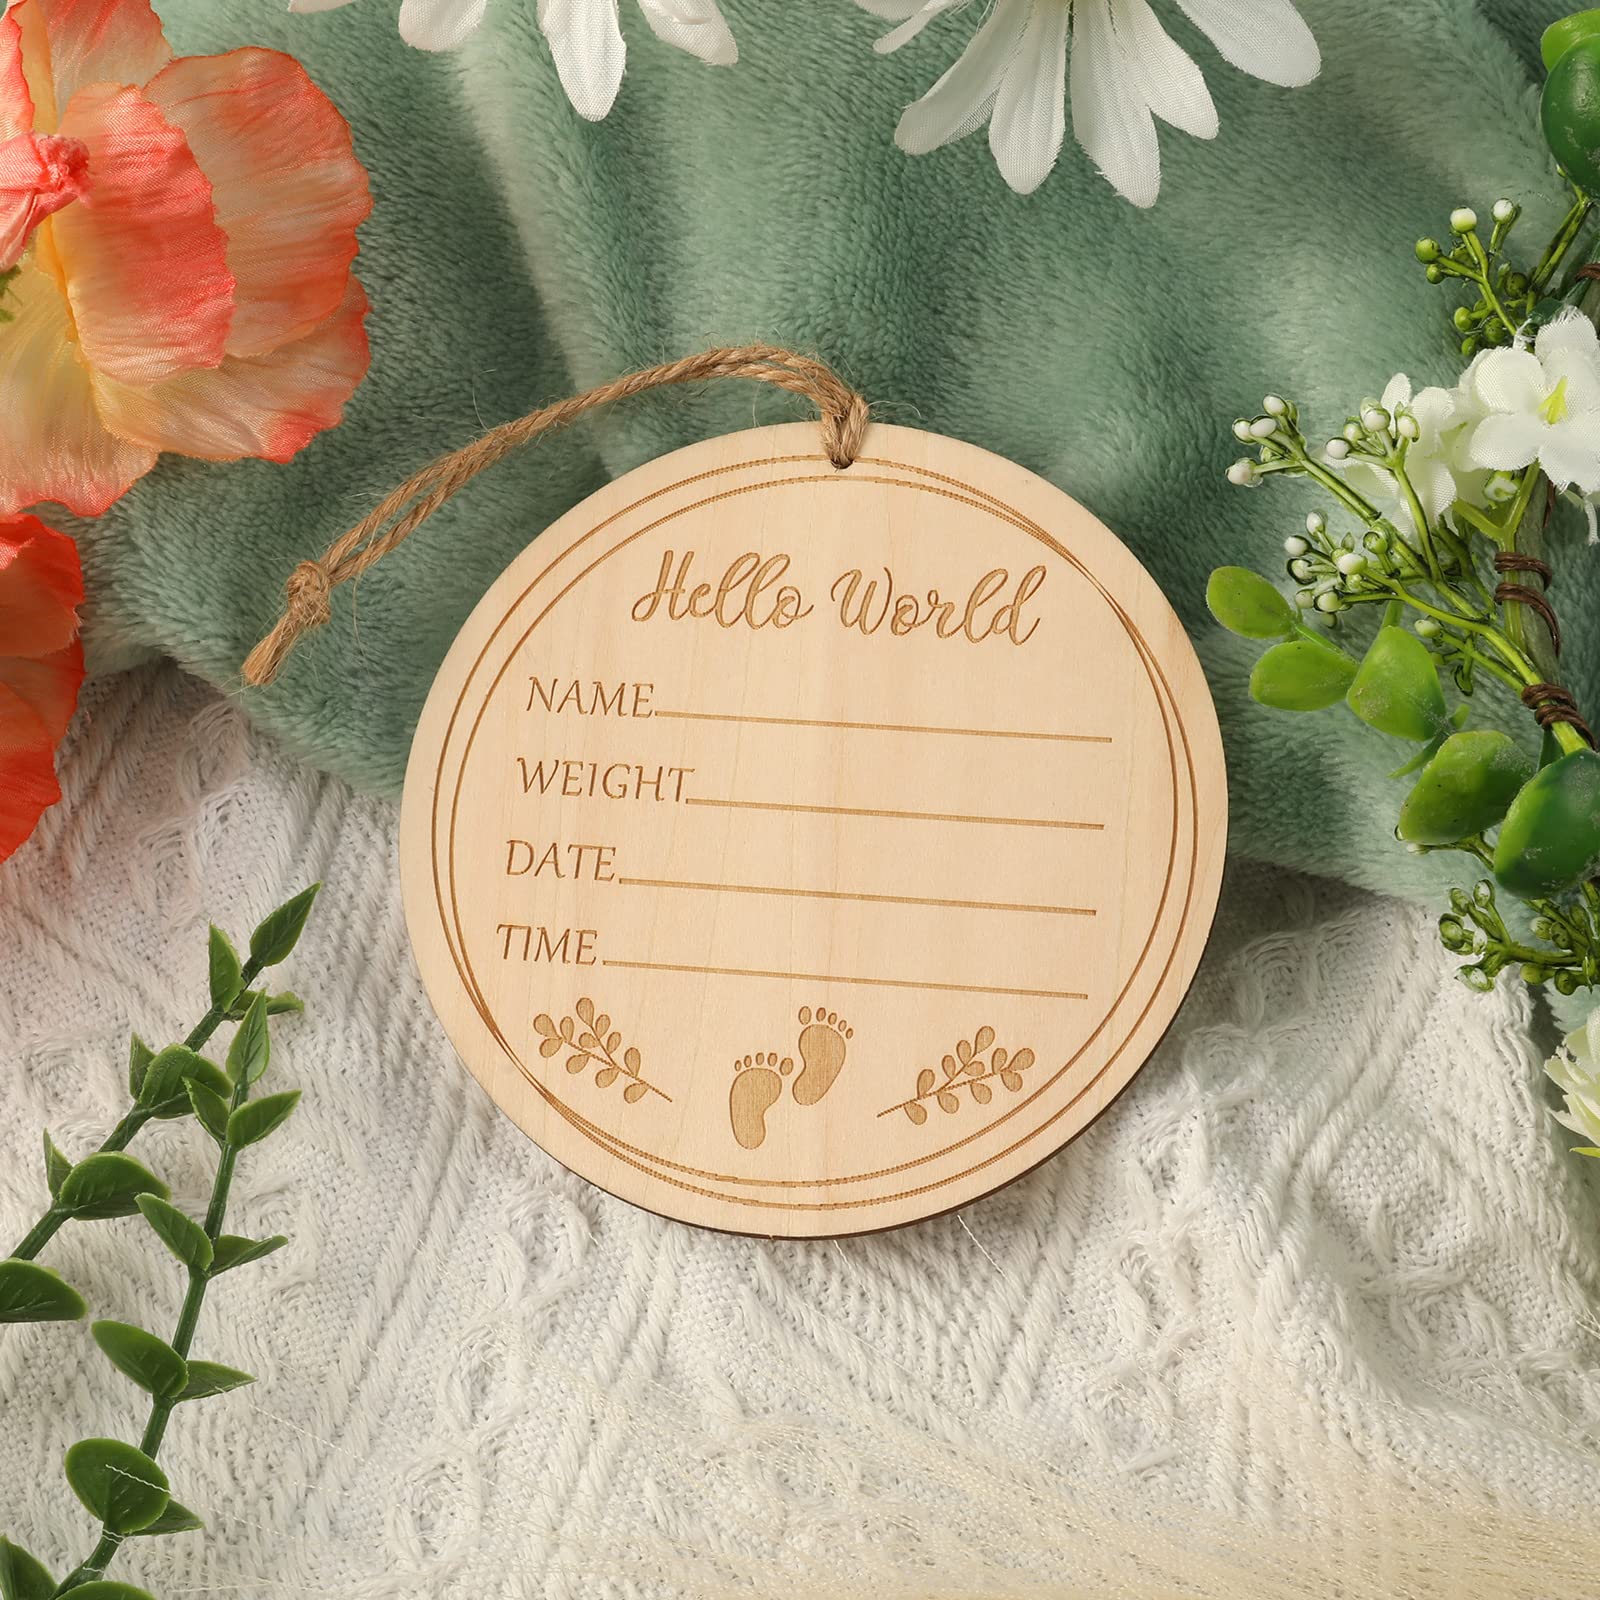 LUTER Baby Announcement Sign, 3.9 inch Hello World Welcome Name Sign with a Hemp Rope Round Wooden Milestone Baby Announcement Plaque for Newborn Photo Props